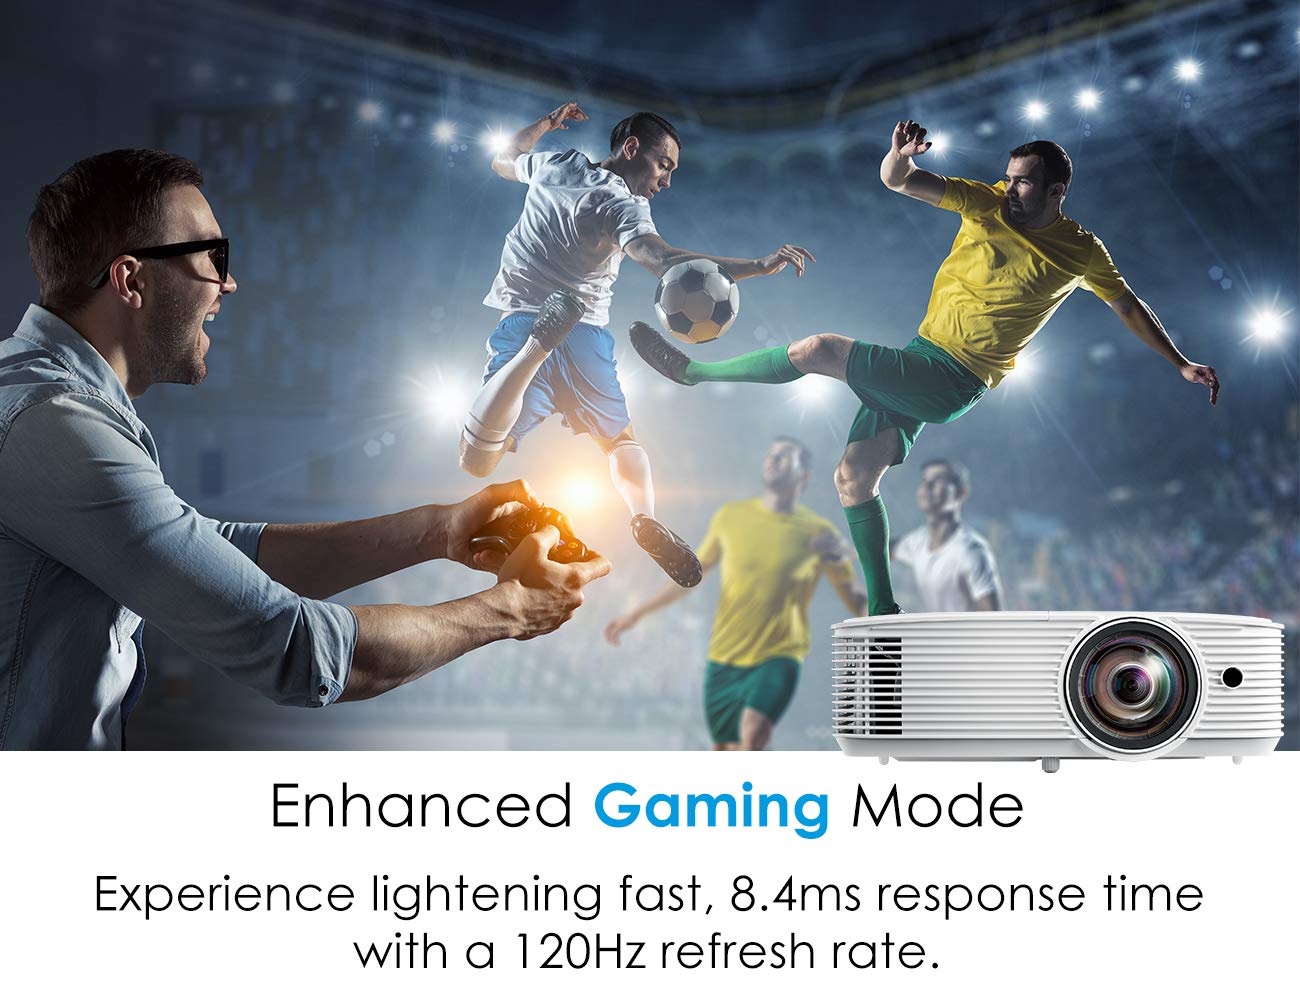 Optoma GT1080HDR Short Throw Gaming Projector | Enhanced Gaming Mode for 1080P 120Hz Gaming at 8.4ms | 4K UHD Support | Play HDR for 4K and 1080P | High 3800 lumens for Day & Night Gaming, White